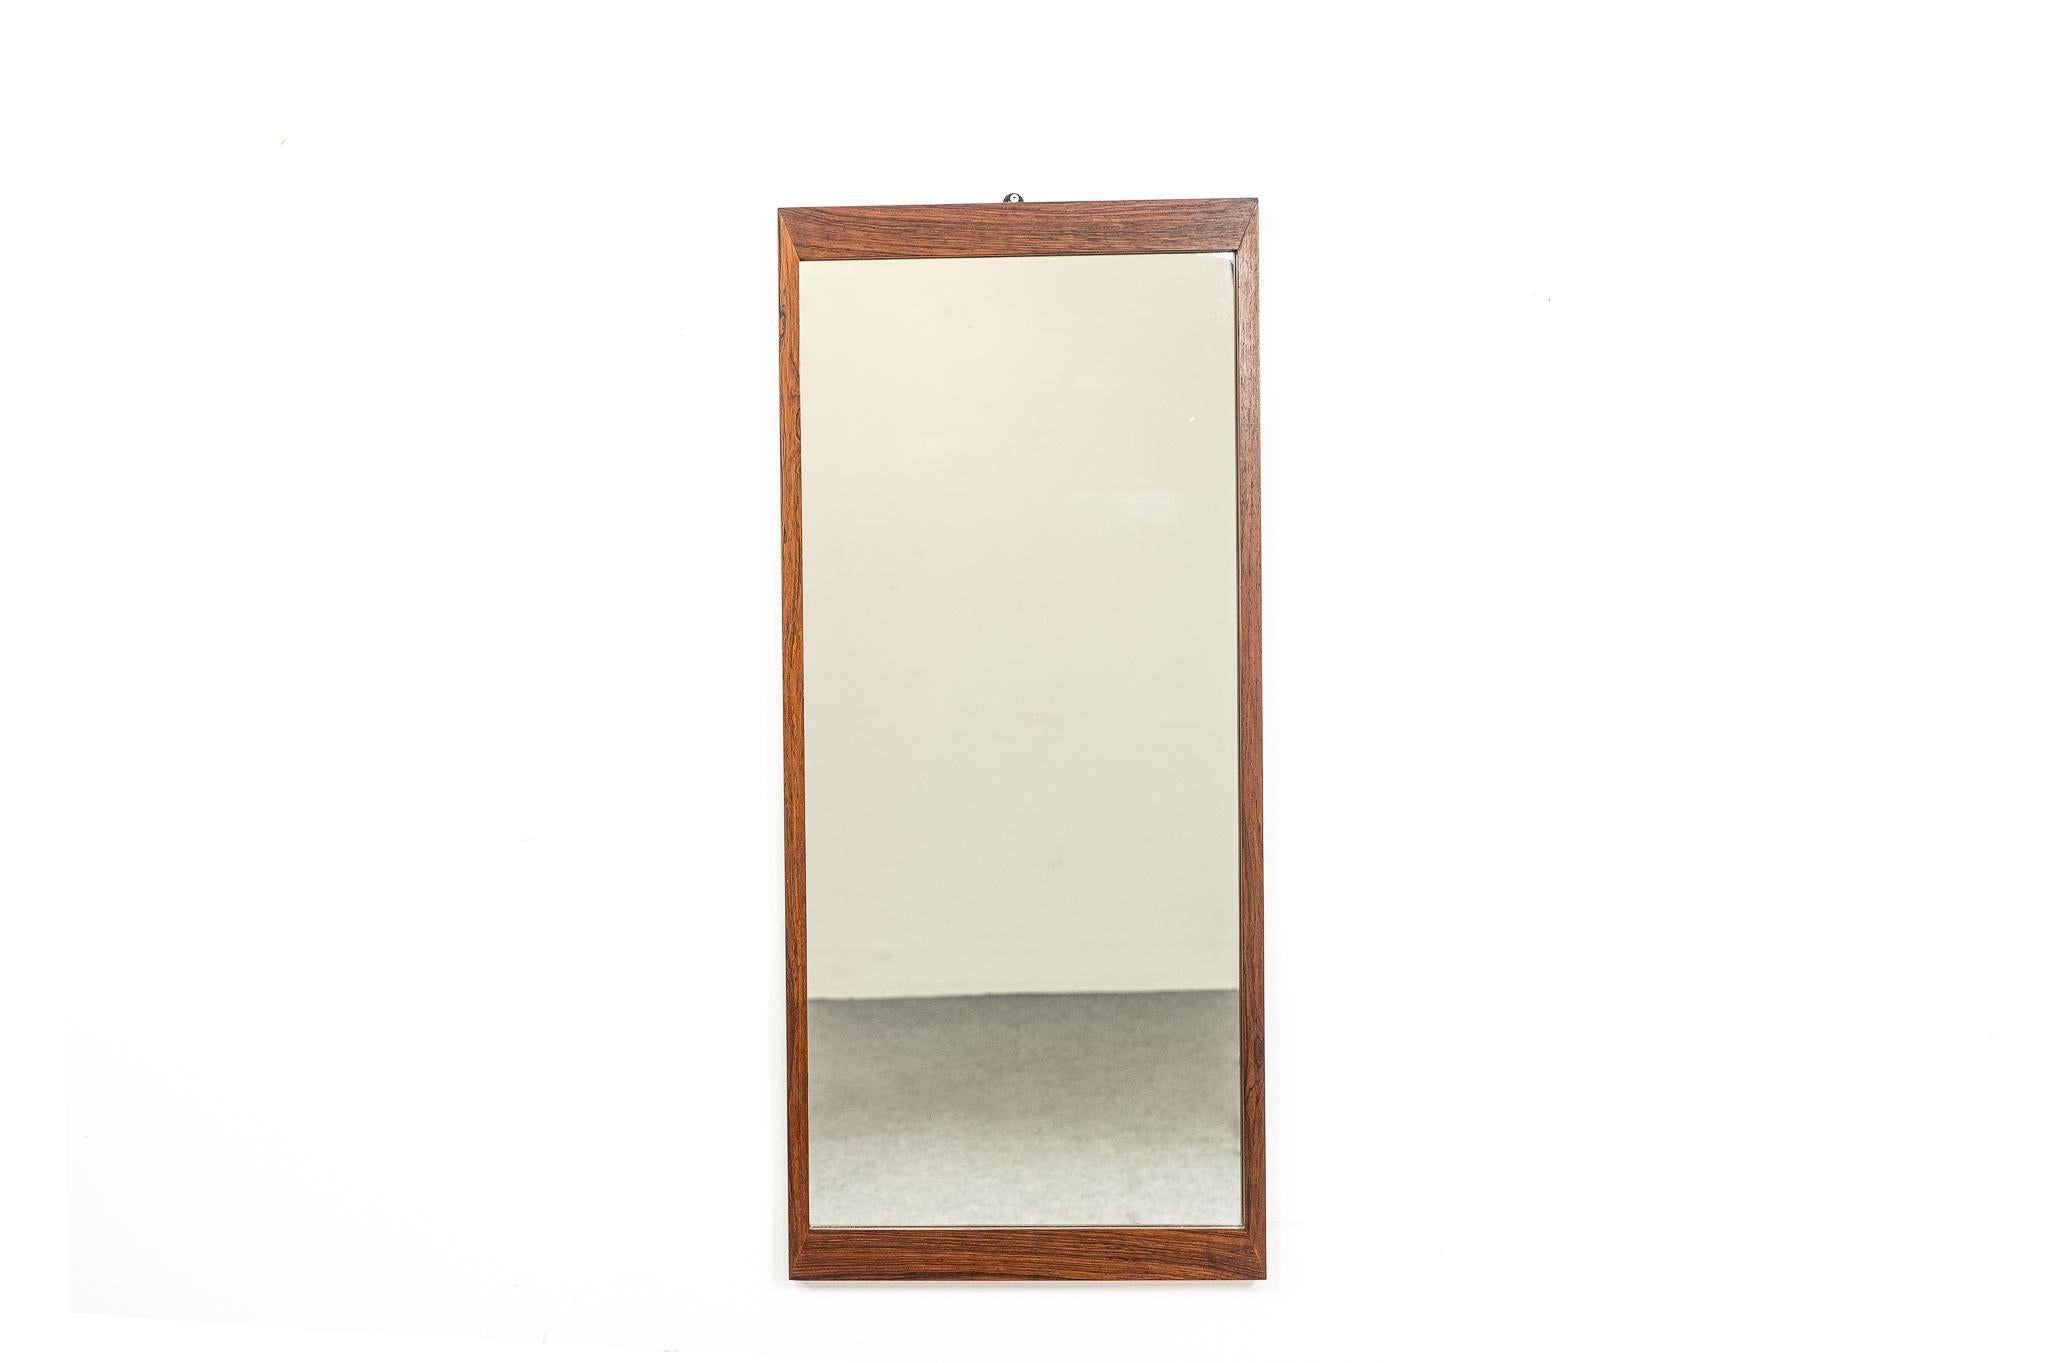 Rosewood Danish modern mirror, circa 1960's. Solid rosewood frame with stunning grain and mirror, original glass. Slim design is perfect for hanging near the door to check yourself before heading out.